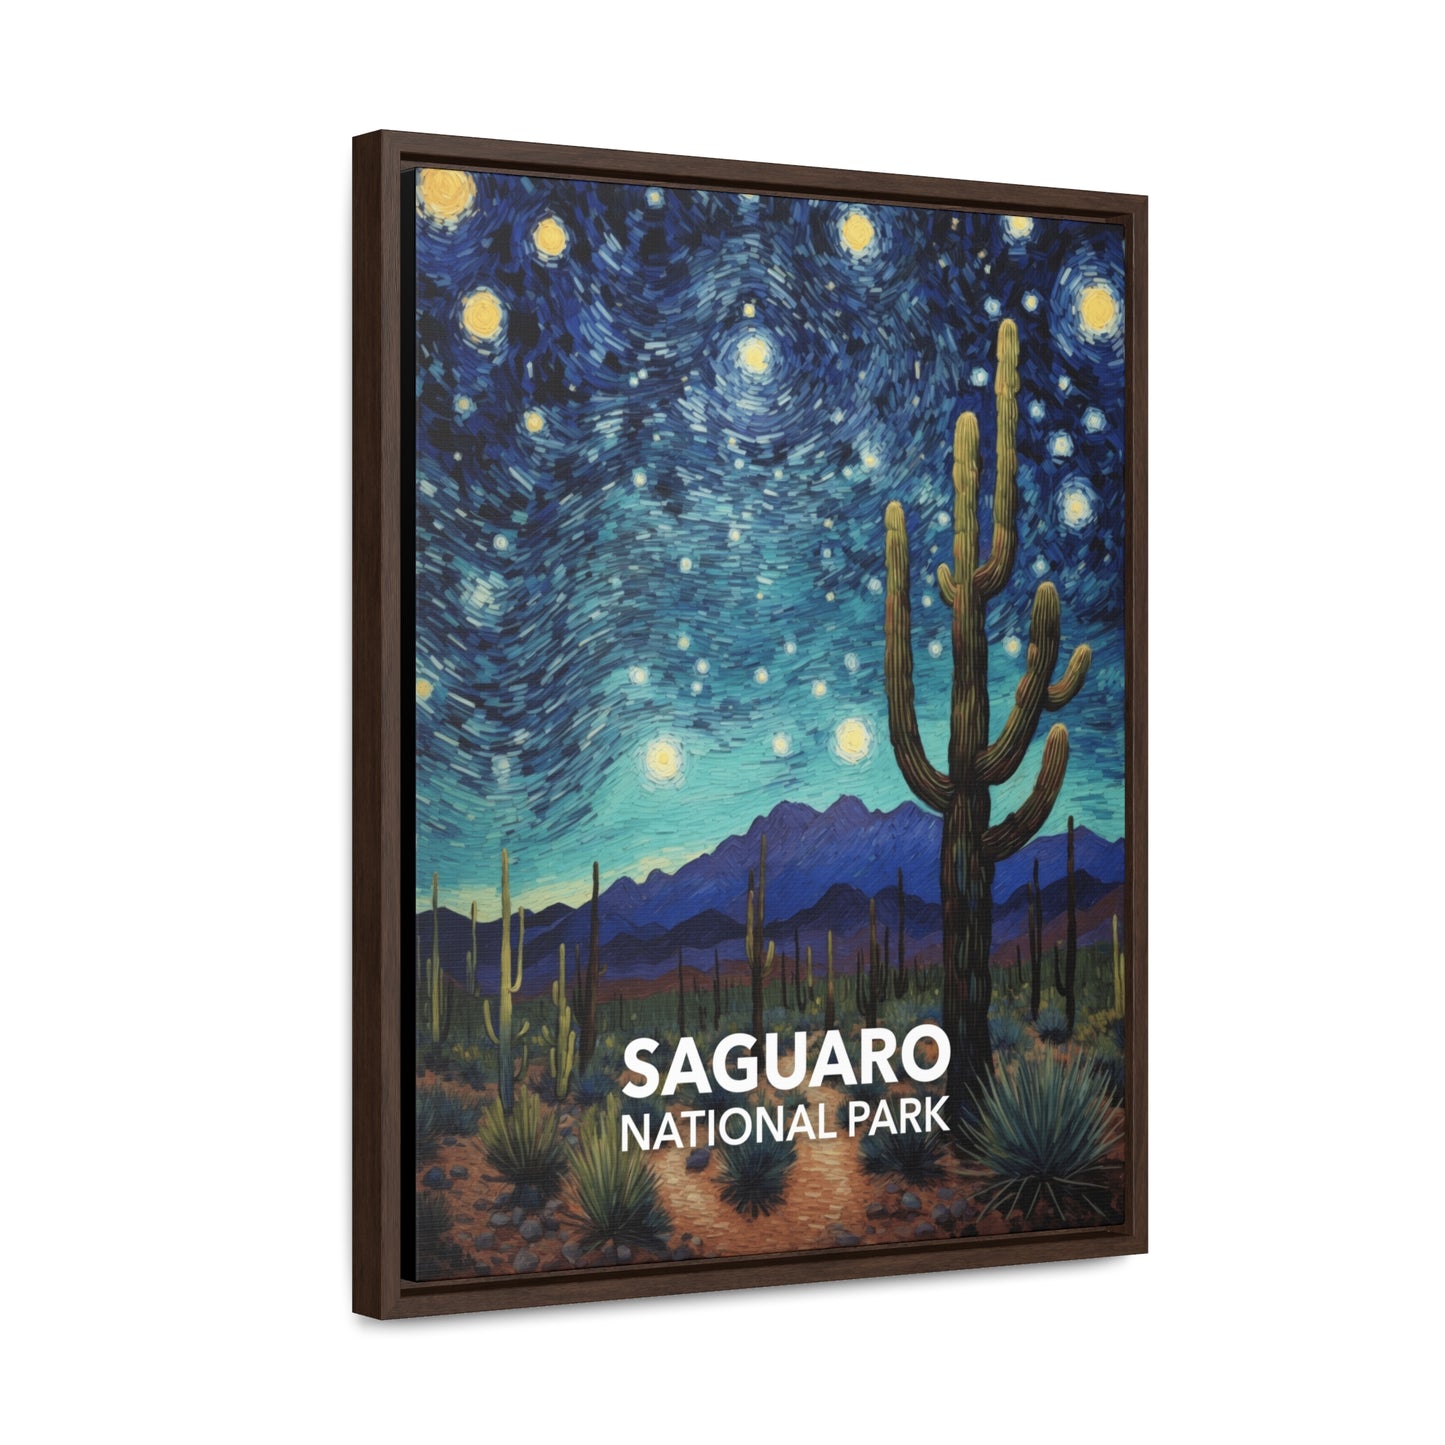 Saguaro National Park Framed Canvas - The Starry Night